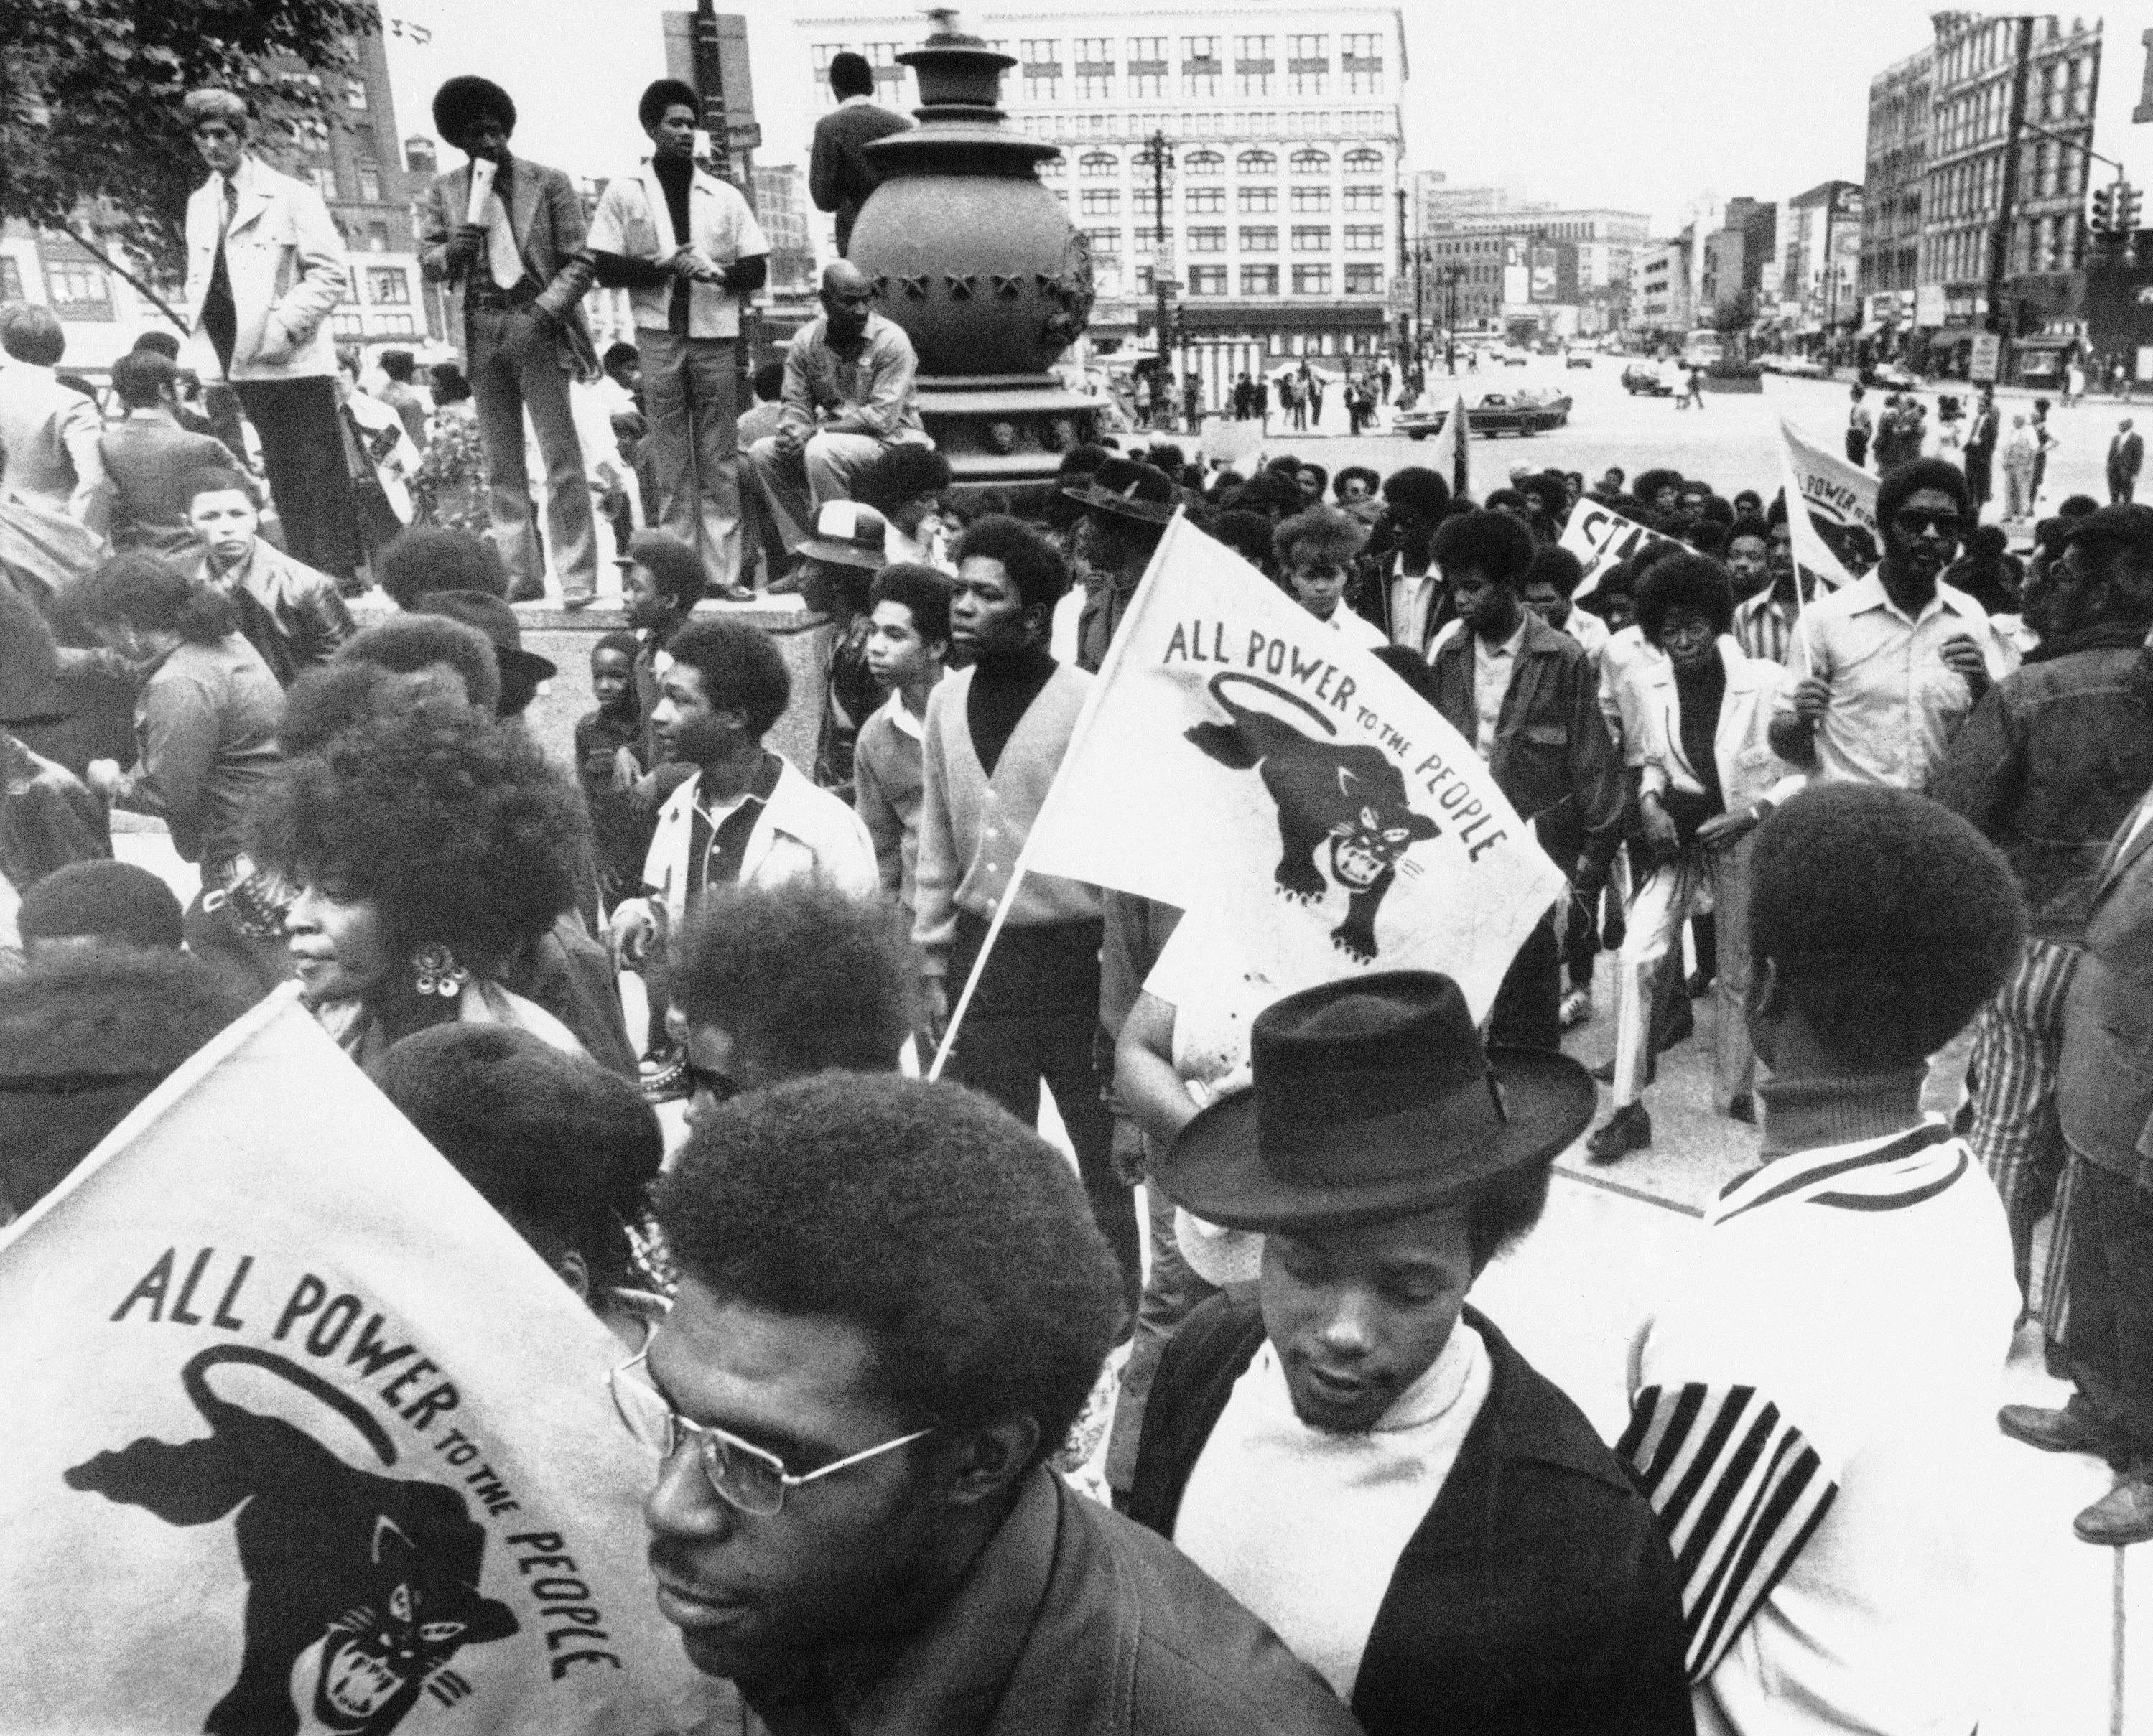 A crowd of 4,000 to 5,000 persons, some carrying Black Panther flags, staged a protest march and rally against the Detroit Police Stress unit, Thursday, Sept. 24, 1971 in Detroit. They were protesting the deaths of two black teen-age boys who were shot last Friday by an officer attached to STRESS (Stop the Robberies – Enjoys Safe Streets). This view shows the group as it entered downtown Kennedy Square.